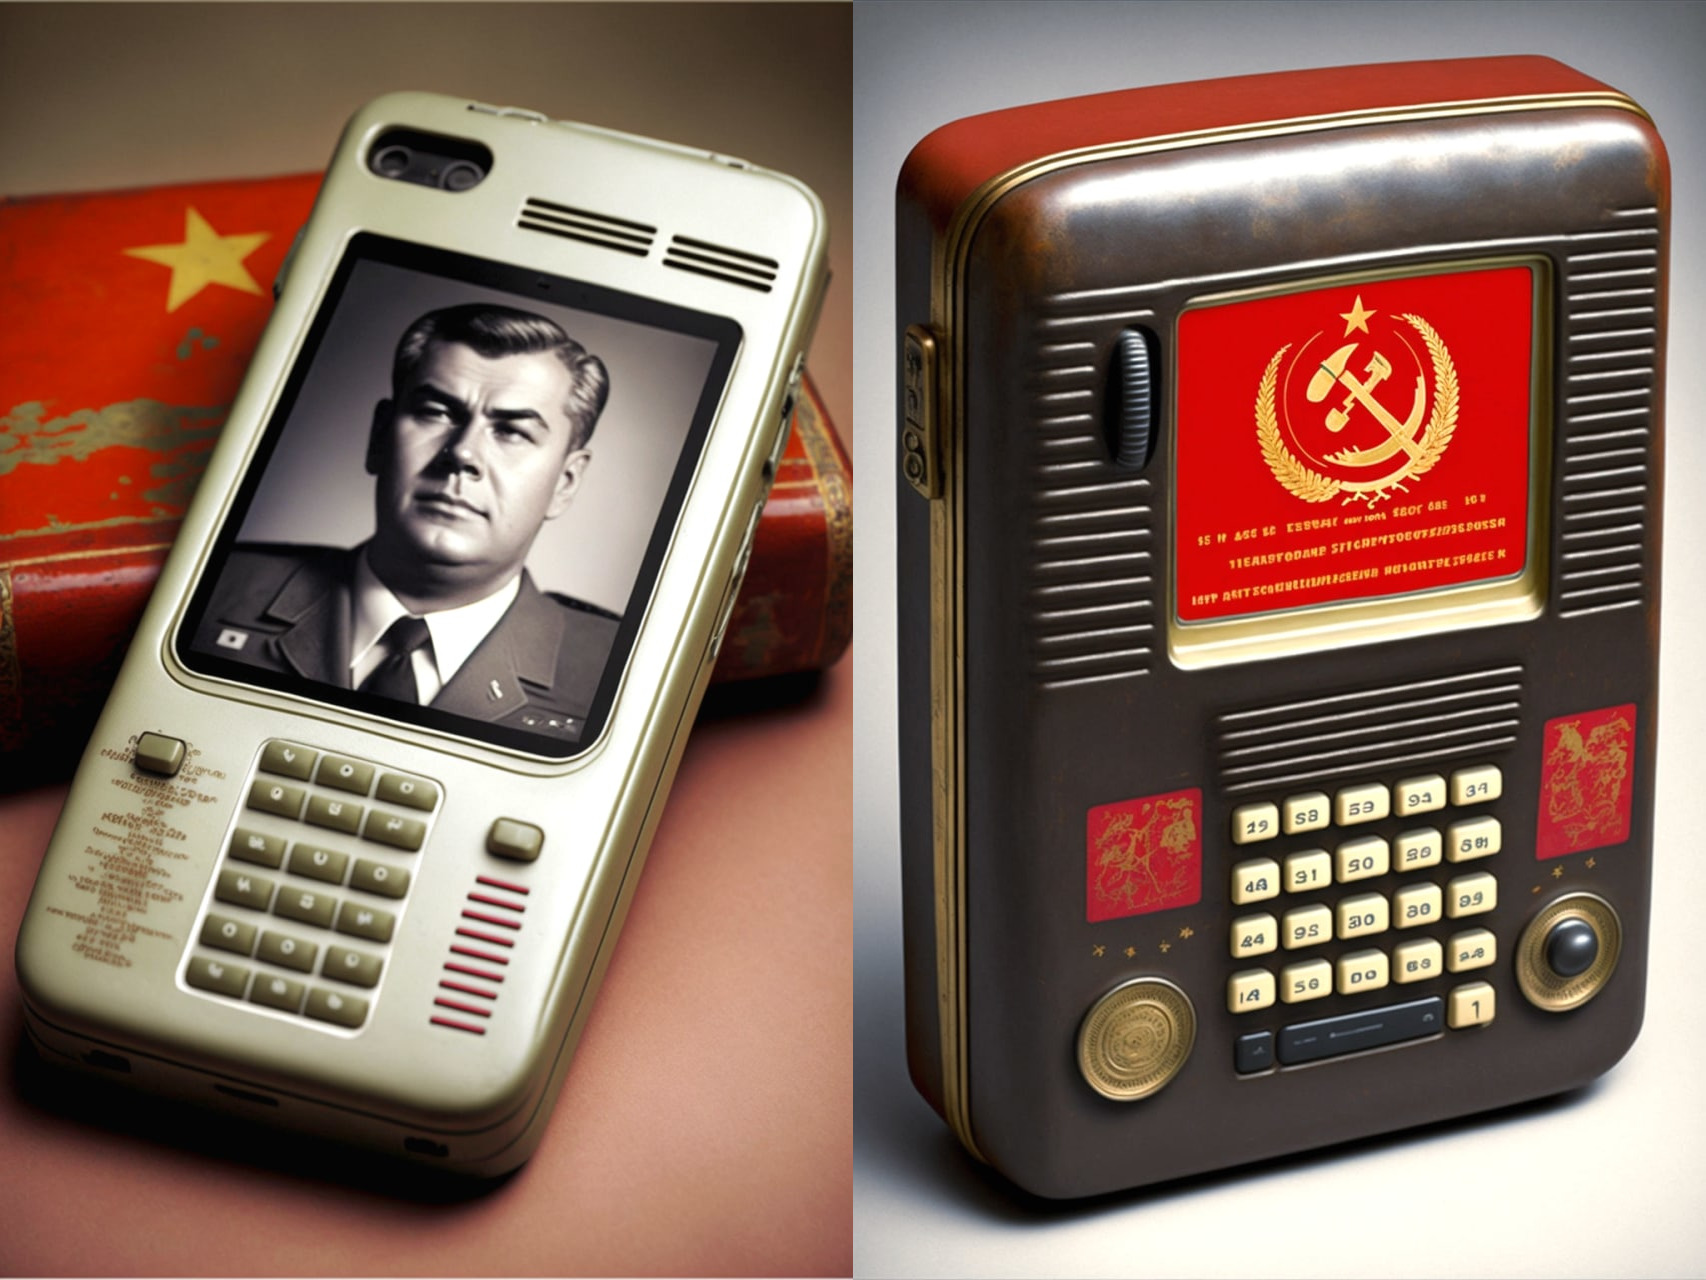 How about that, Tim Cook? A neural network showed a Soviet-made iPhone